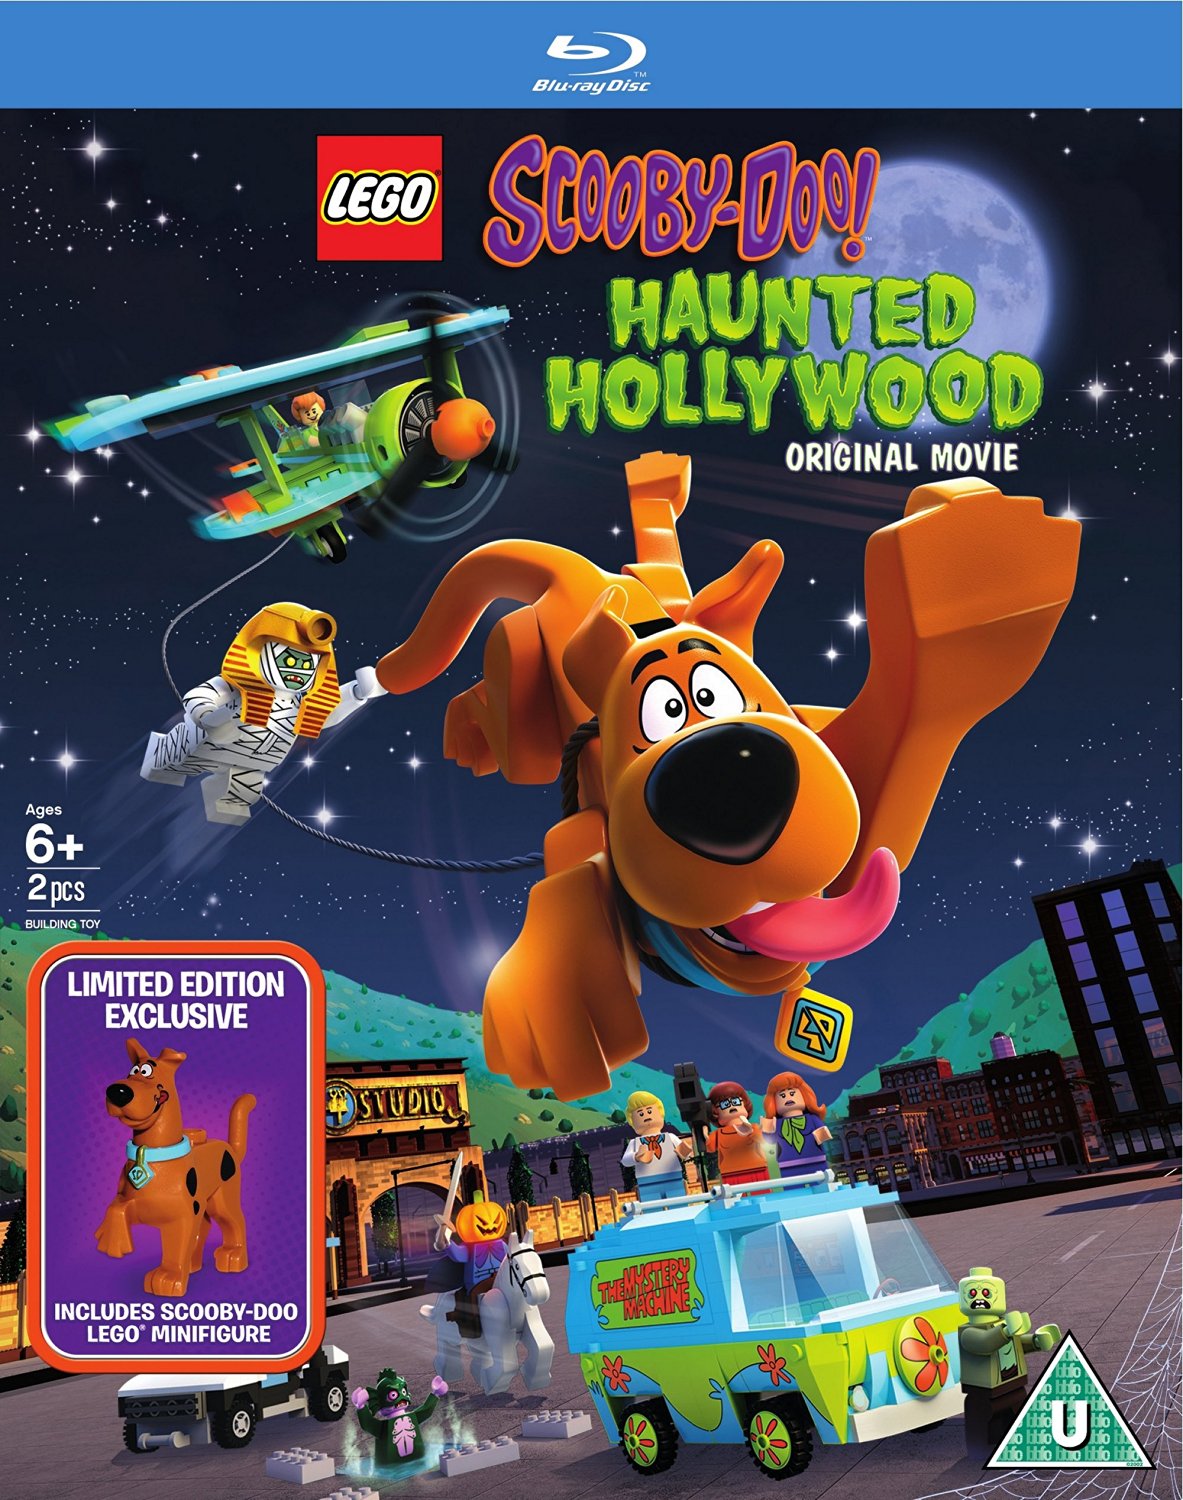 Lego Scooby-Doo!: Haunted Hollywood Pics, Movie Collection